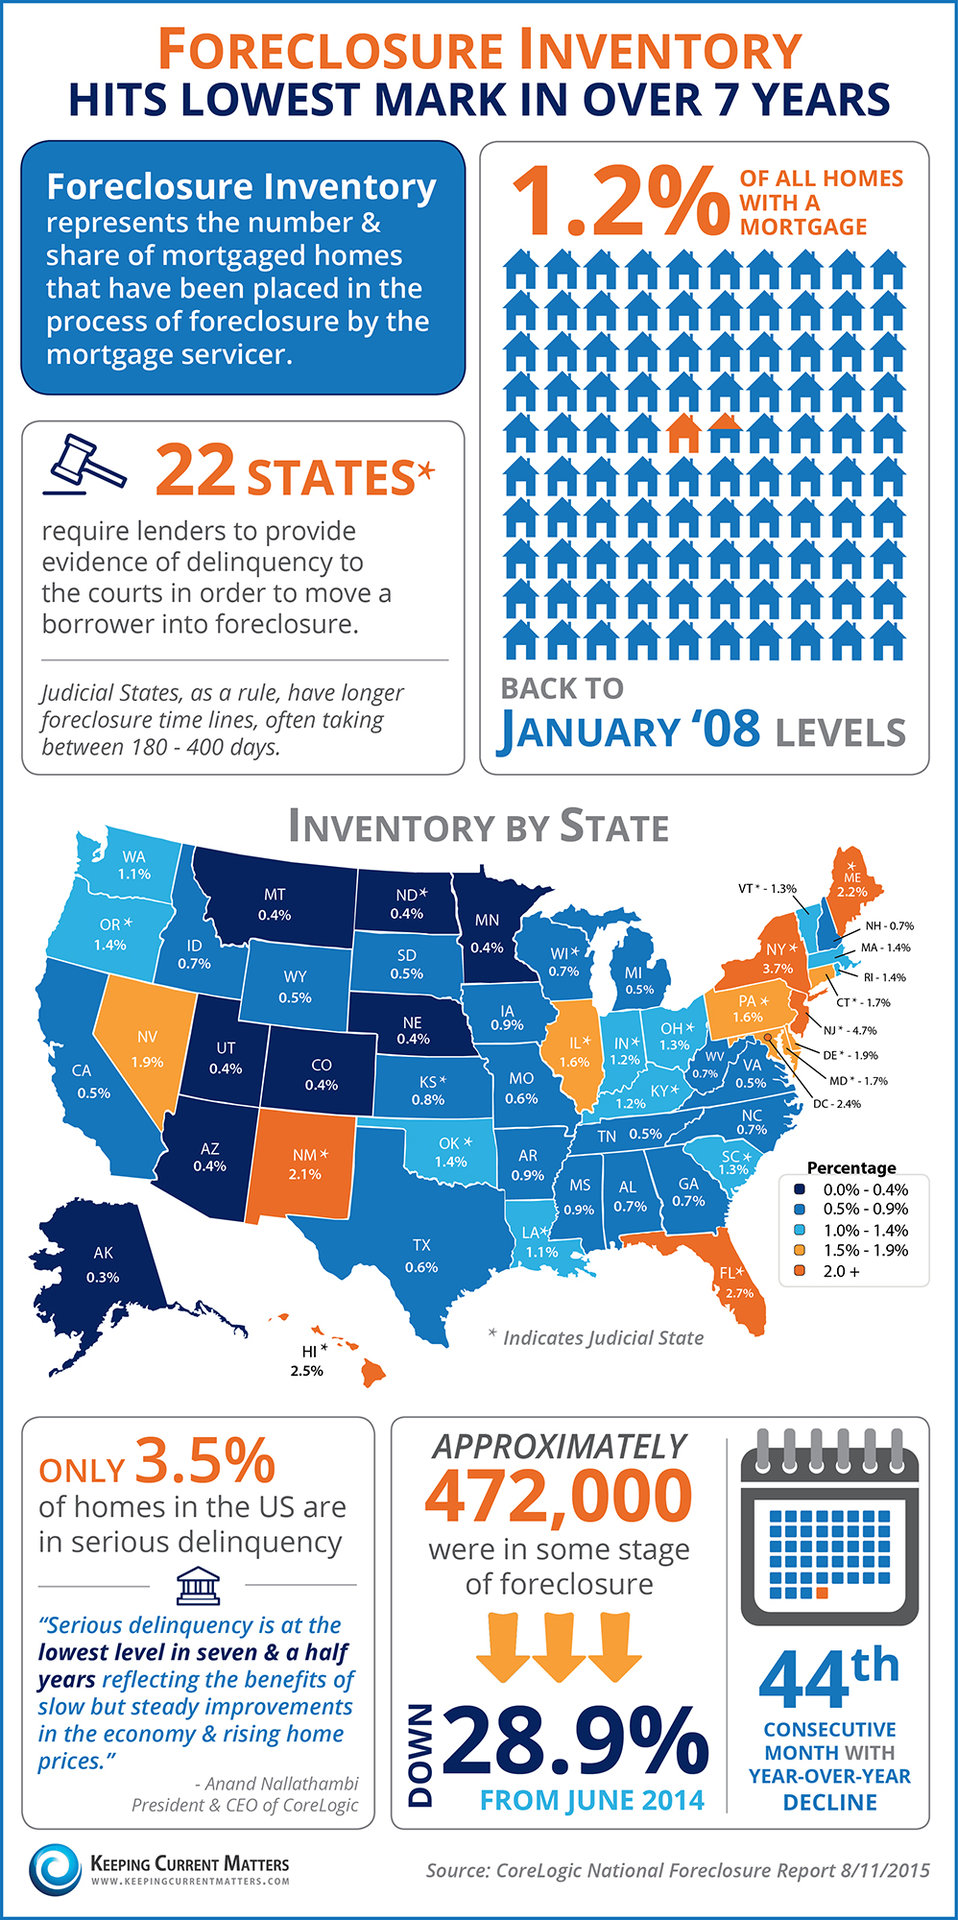 Foreclosure Inventory Hits Lowest Mark in Over 7 Years [INFOGRAPHIC] | Keeping Current Matters